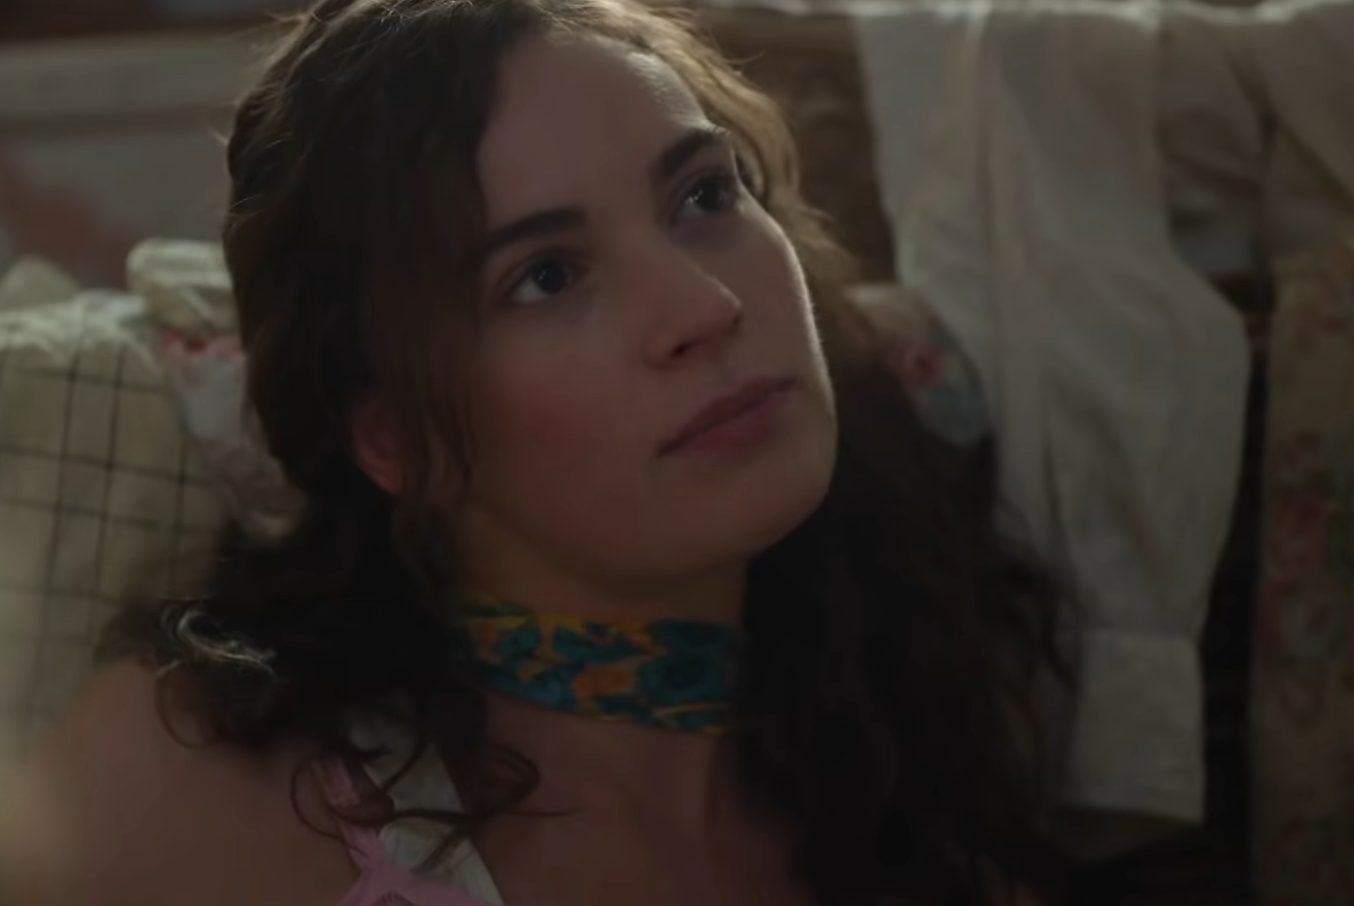 Lily James portrayed the role of Linda